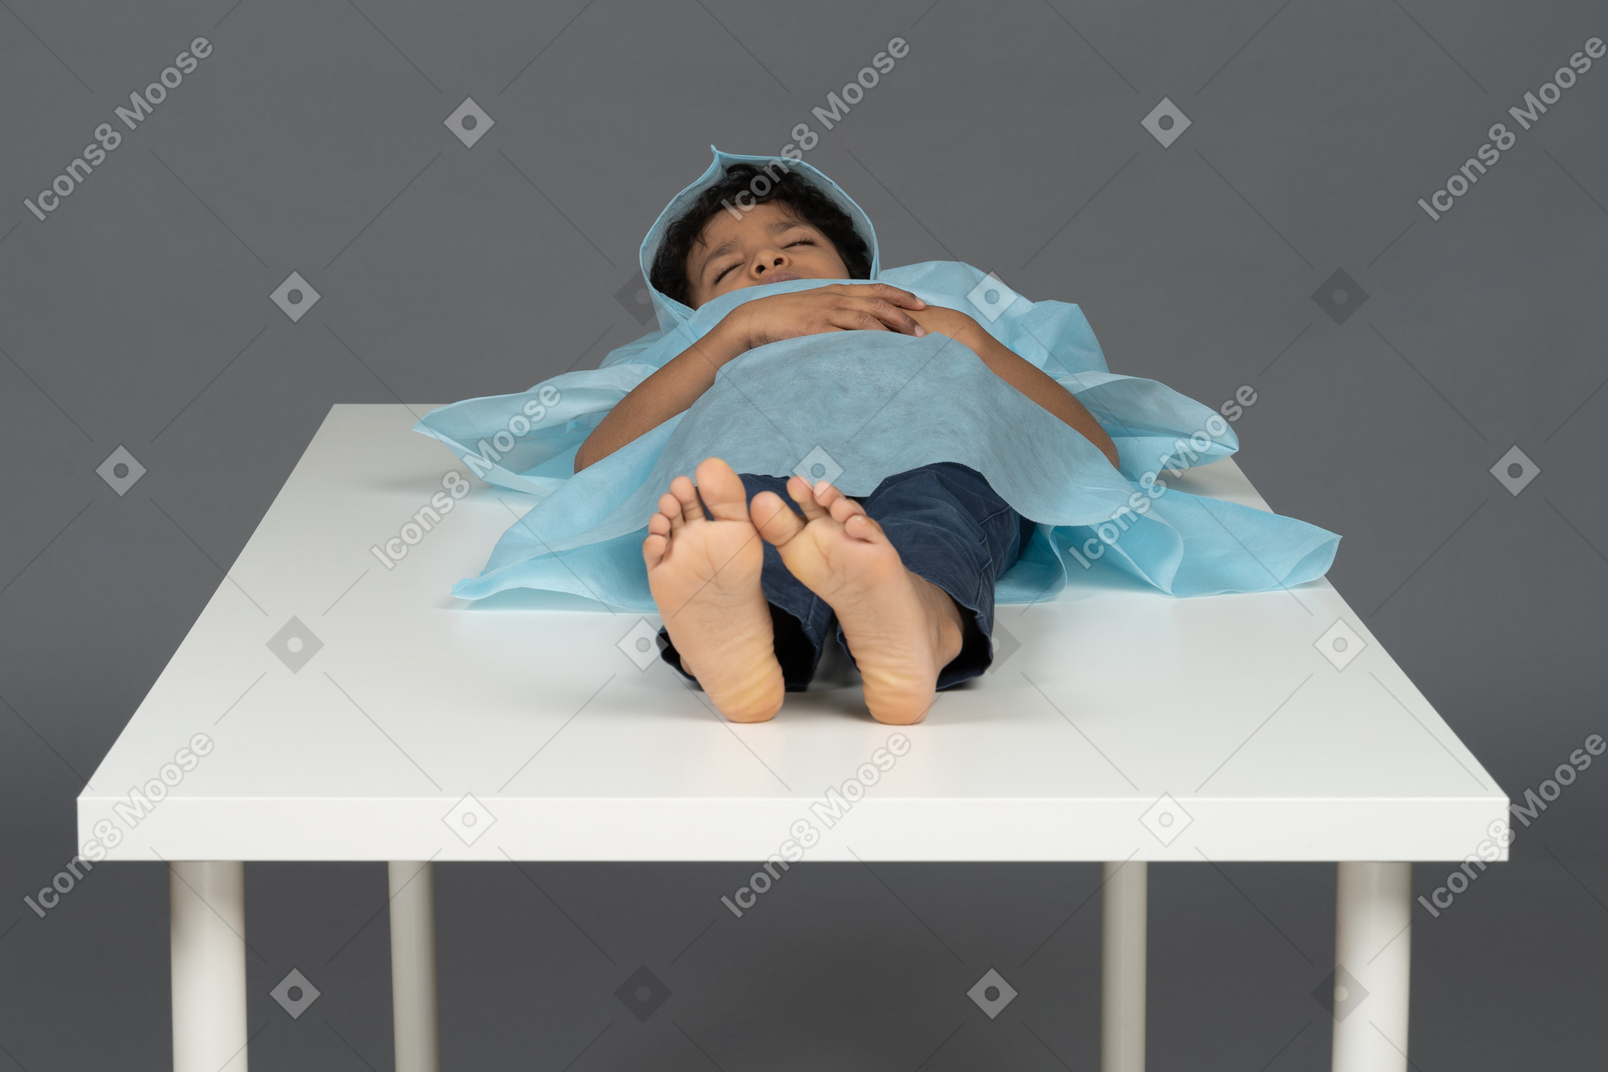 Kid lying down on the table